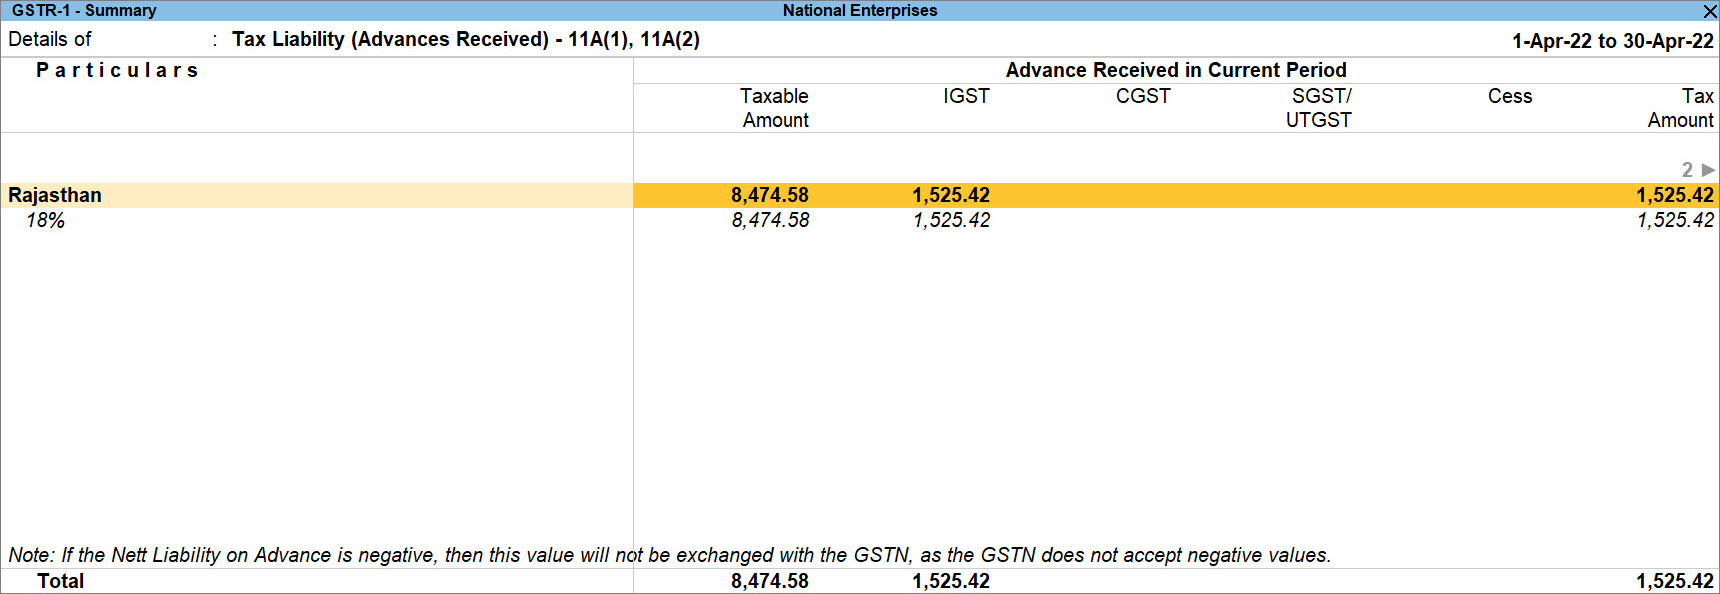 Journal Voucher to Raise the Tax Liability in GSTR-1 of TallyPrime